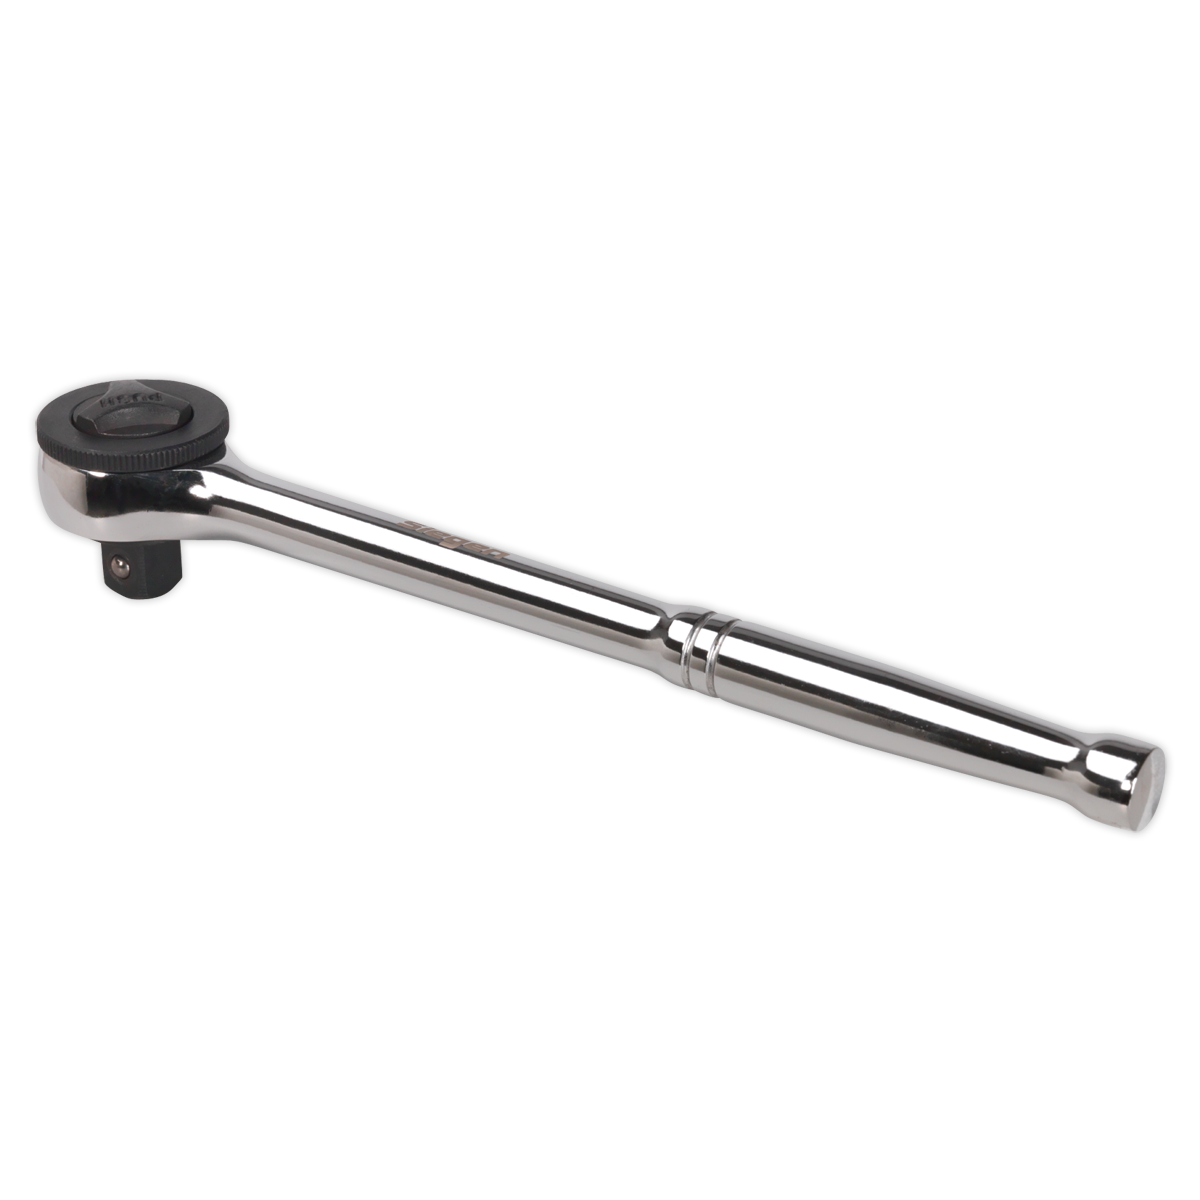 Sealey Ratchet Wrench 1/2"Sq Drive